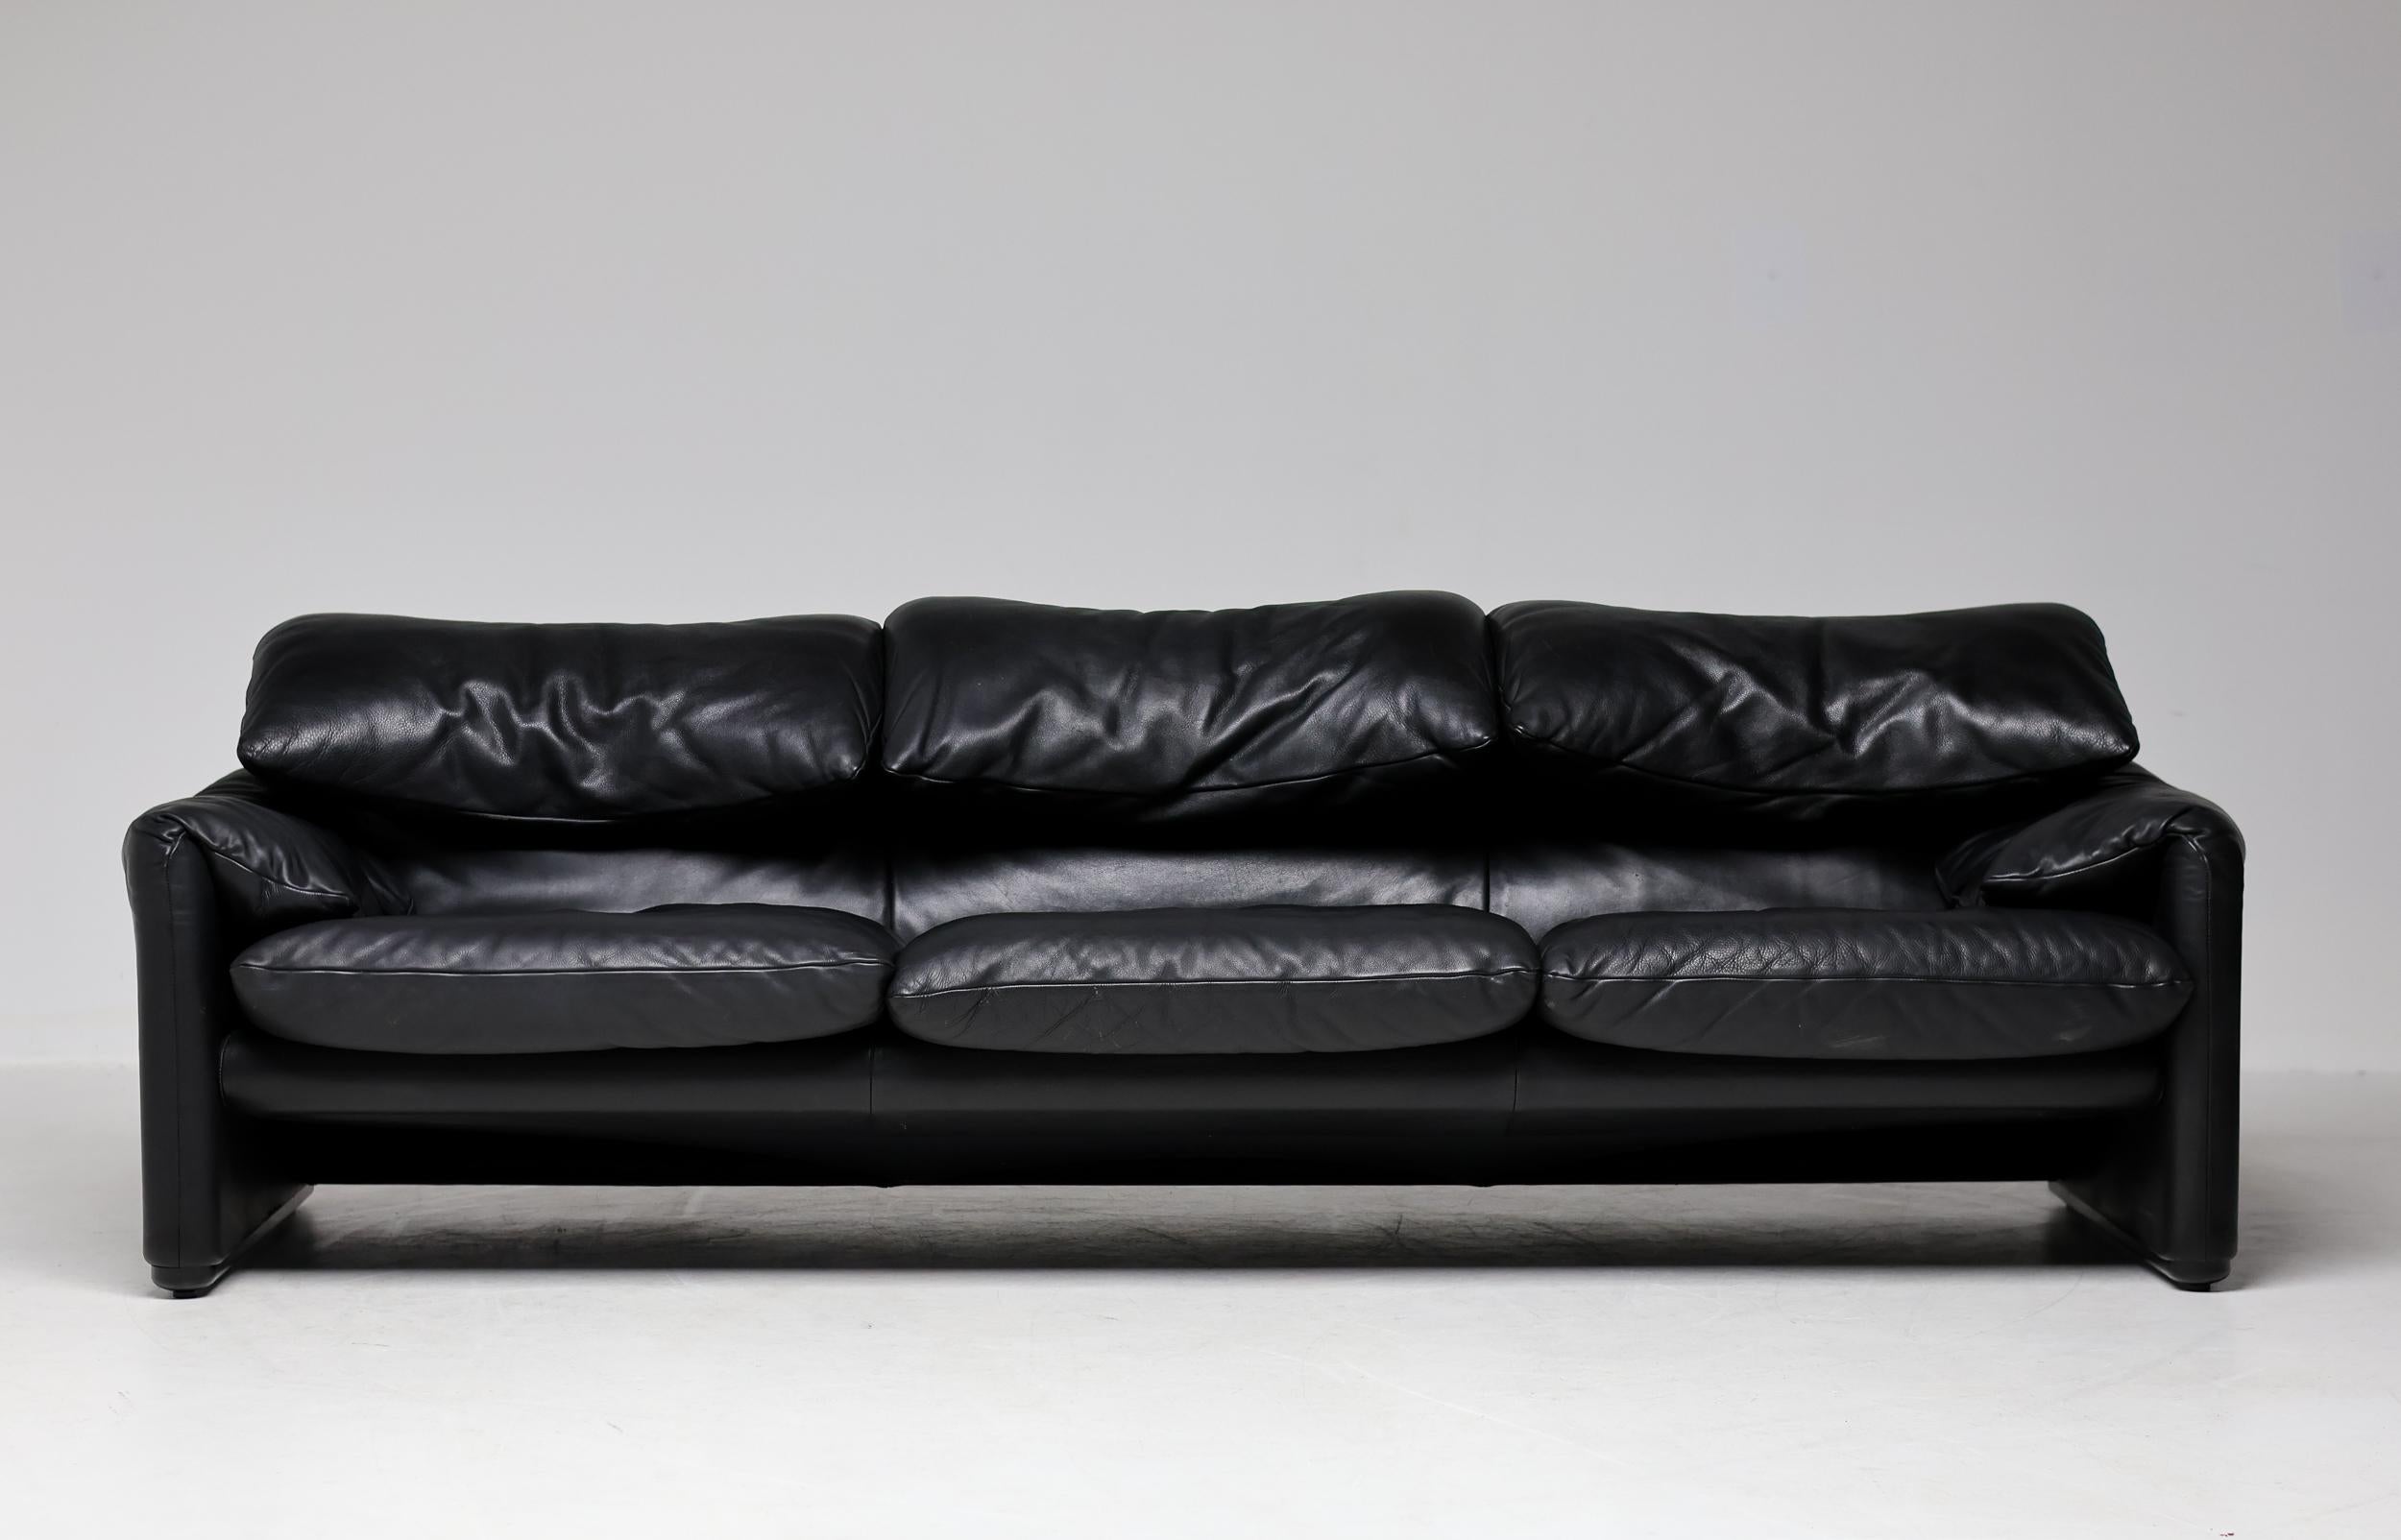 Desirable early Maralunga 3-seat Sofa in black leather, designed in 1973 by Vico Magistretti for Cassina. 
This sofa features back rests cushions that can be folded up or down. The effect is a sofa that serves two functions: It’s both a backdrop for